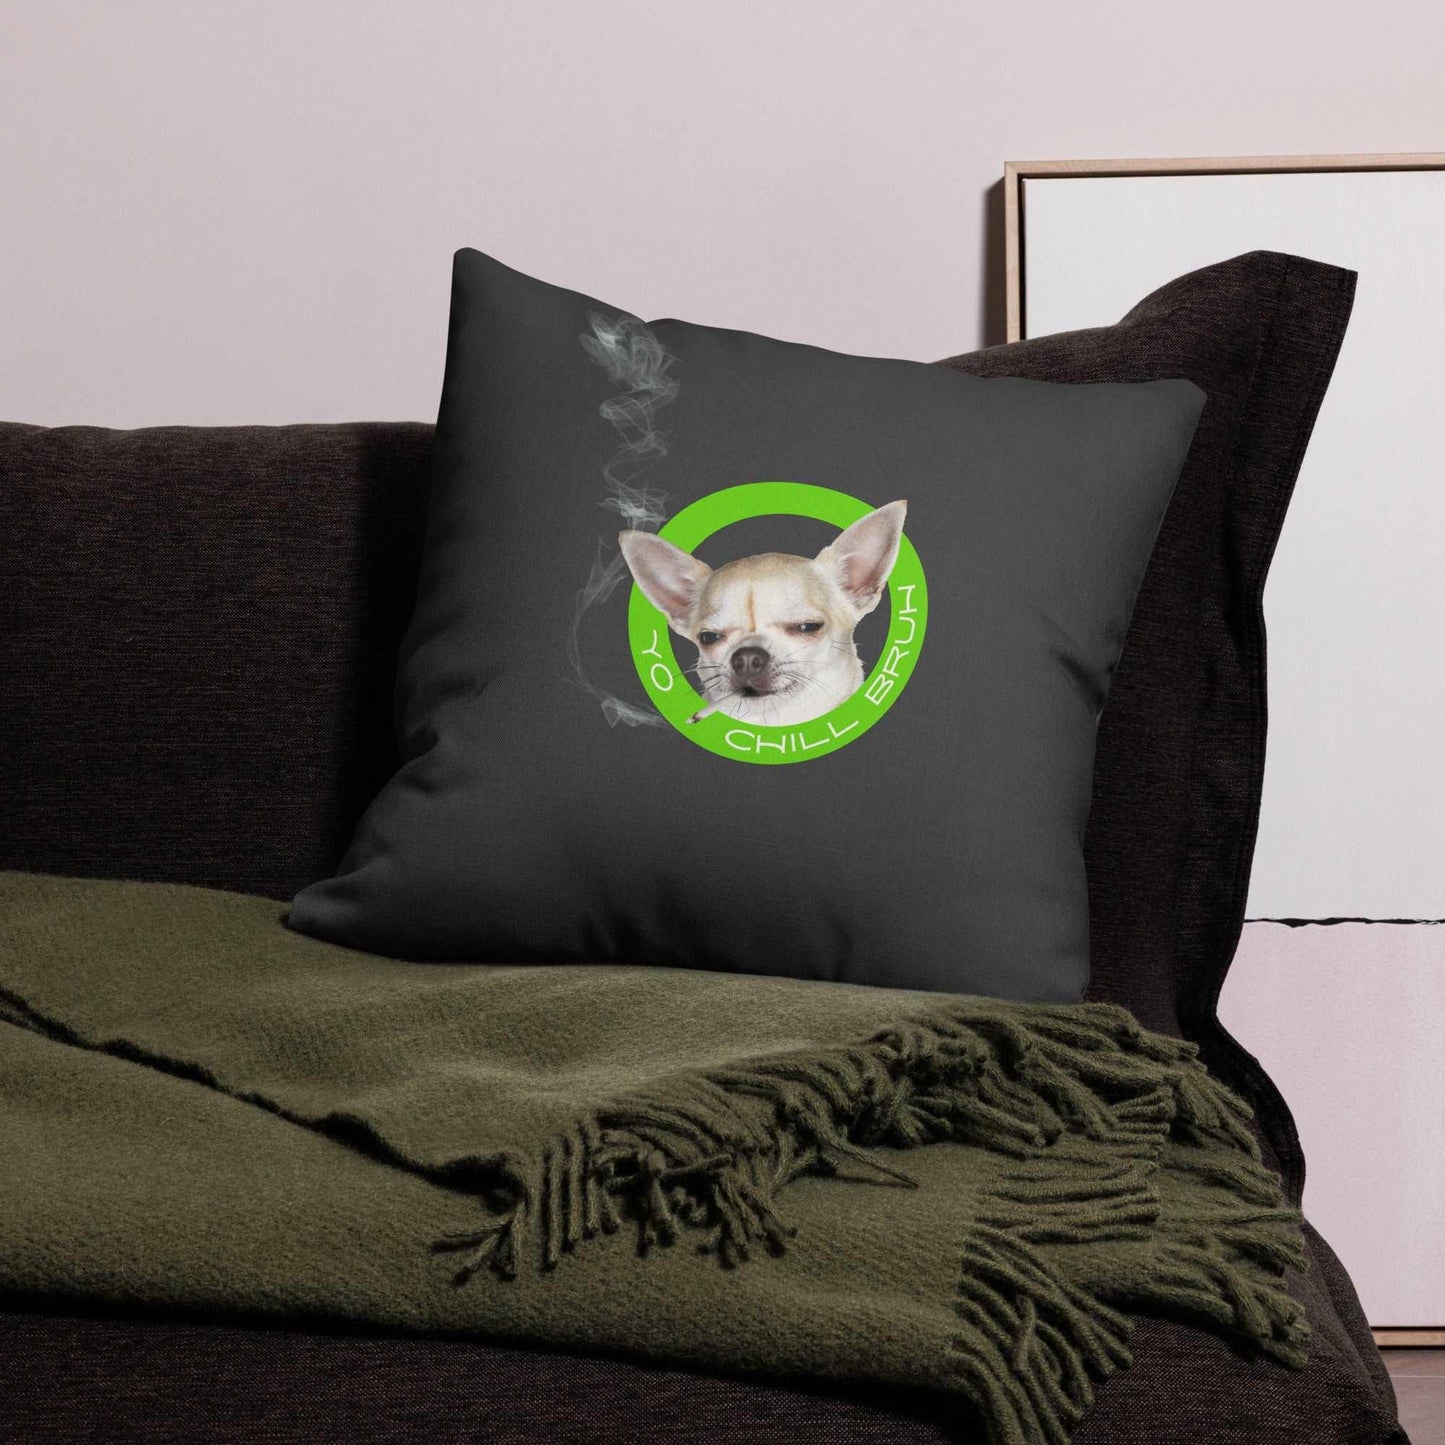 Yo Chill Bruh - very chill chihuahua smoking a cigarette - cool chihuahua meme cushion cover - so funny! Premium linen-feel polyester. Deep dark grey background with vivid print on both sides.